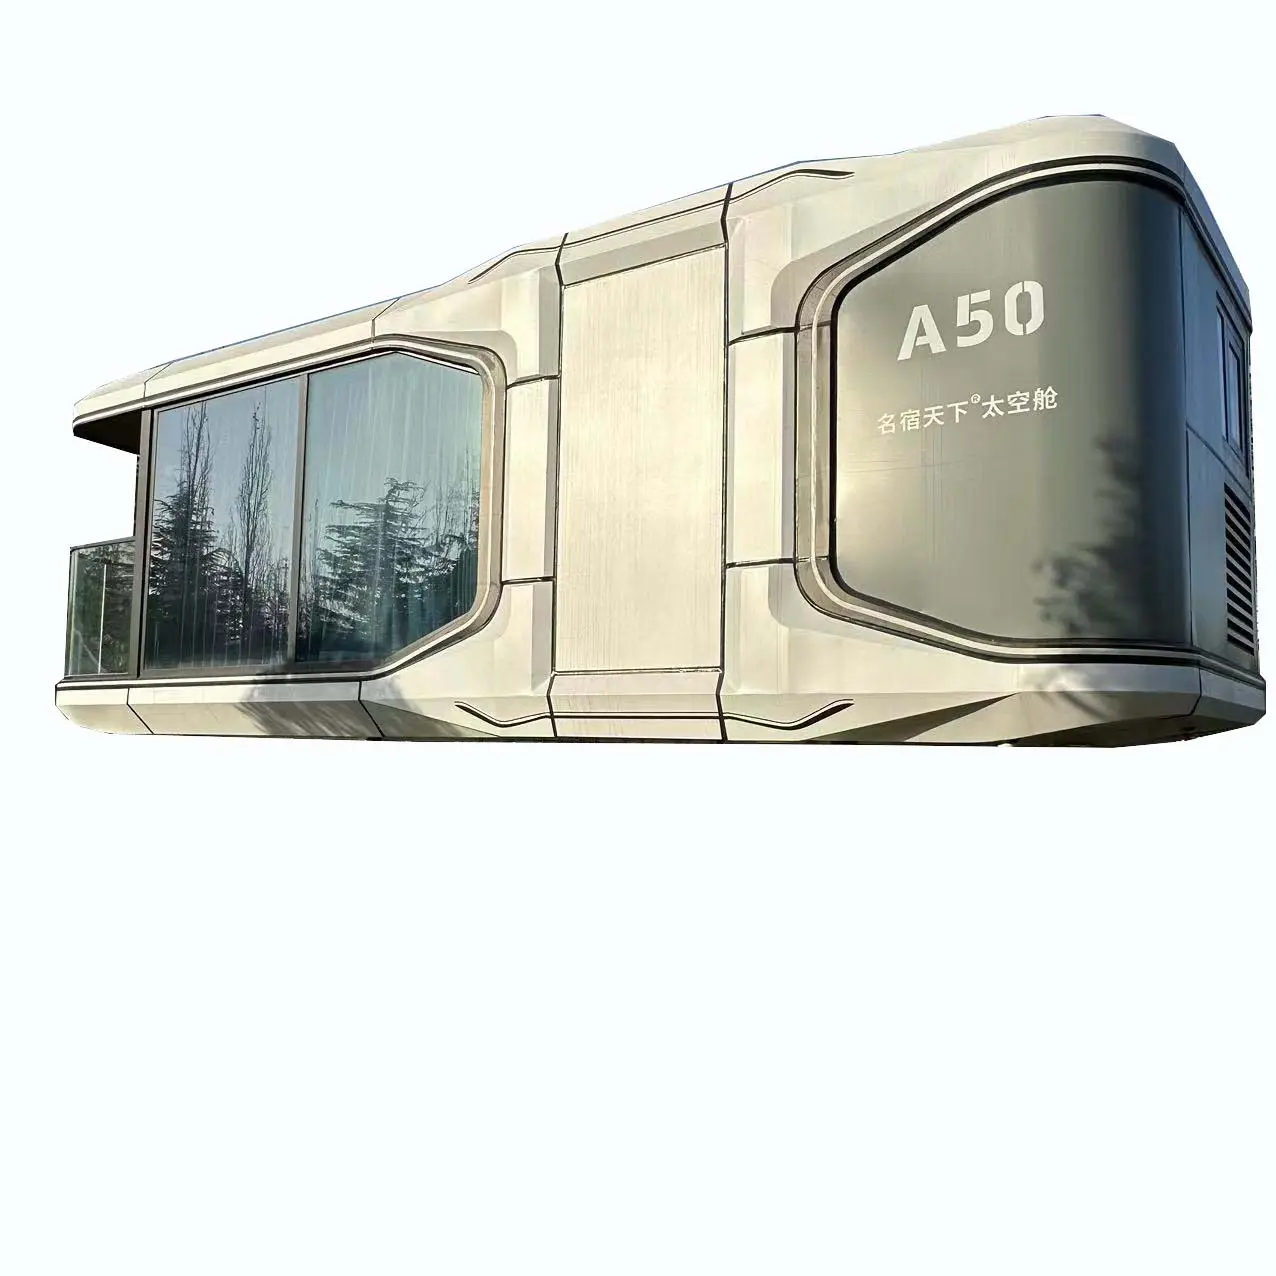 Luxury Camping Space Capsule Prefab cabin Glass Moving House Modern Prefab House Tourism mobile homestay Prefab Container House